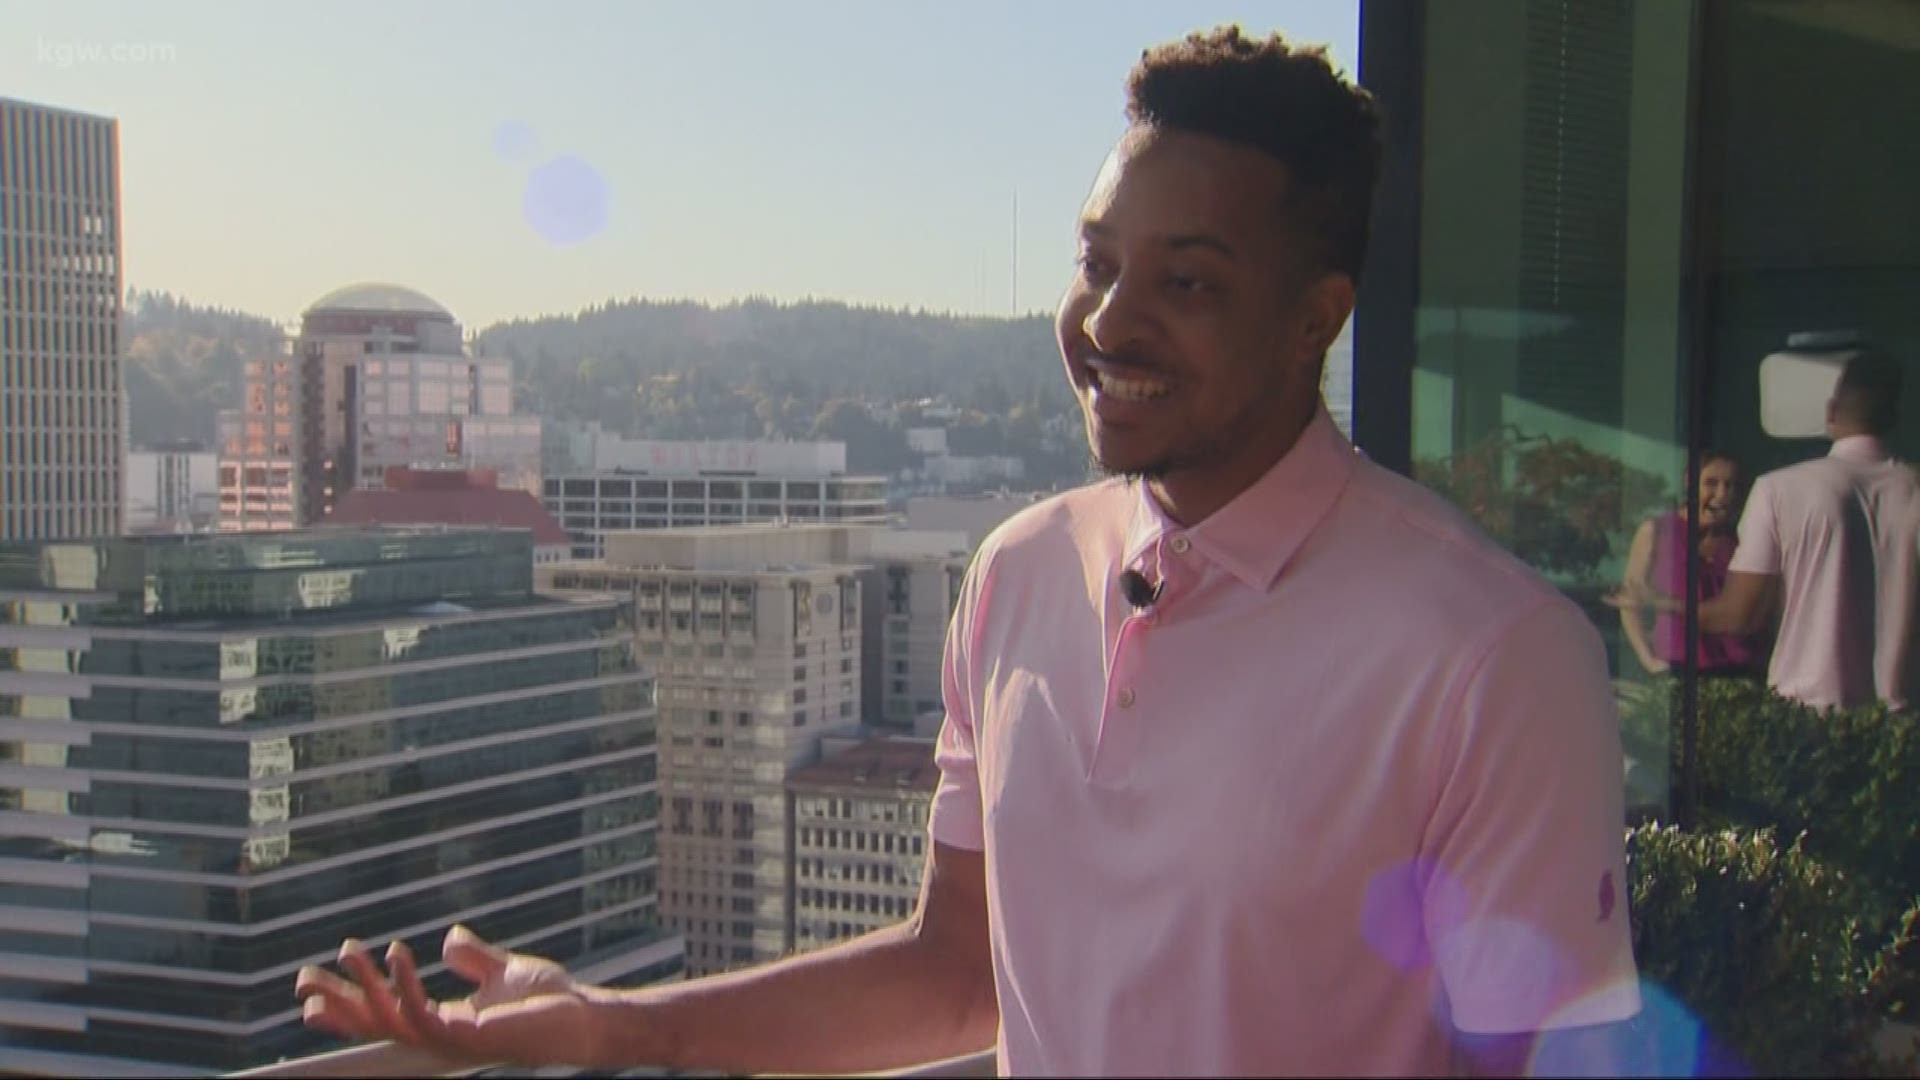 October is Breast Cancer Awareness Month. This weekend, CJ McCollum will join survivors and supporters at the Making Strides Against Breast Cancer walk.